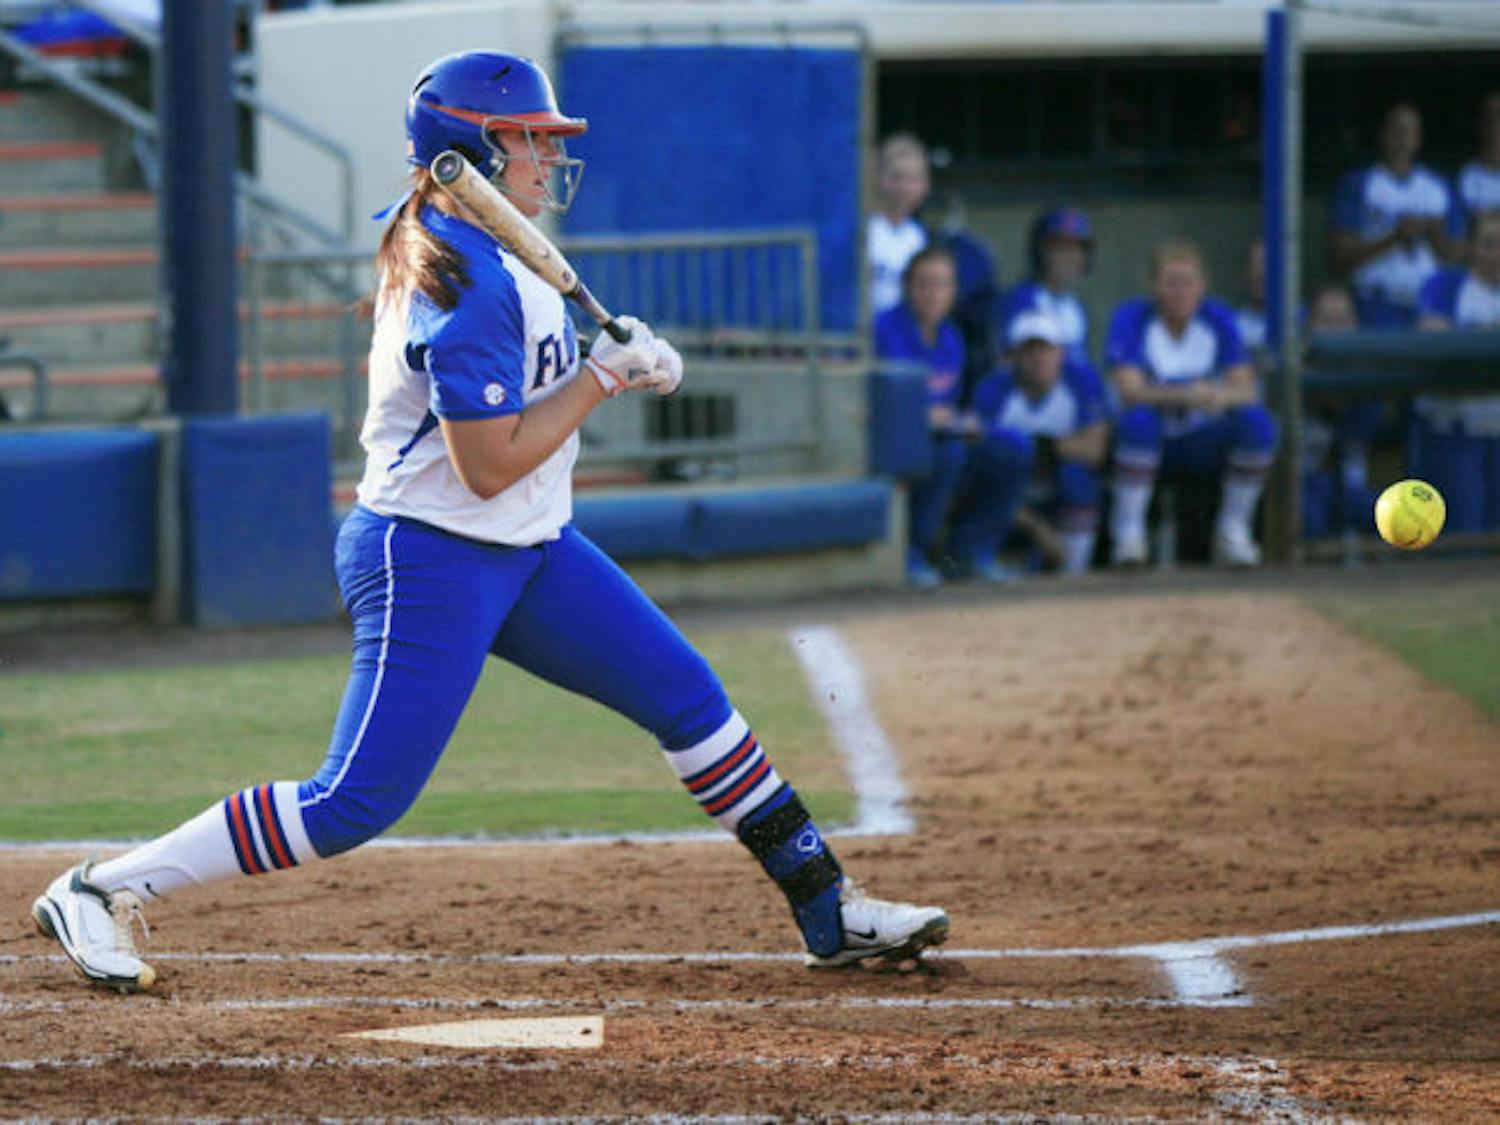 Sophomore Lauren Haeger (17) swings during an at-bat in Florida’s 6-5 win against Tennessee on March 15 at Katie Seashole Pressly Stadium. Haeger went 2 for 3 with a home run, a double and five walks in Friday's doubleheader against Arkansas.